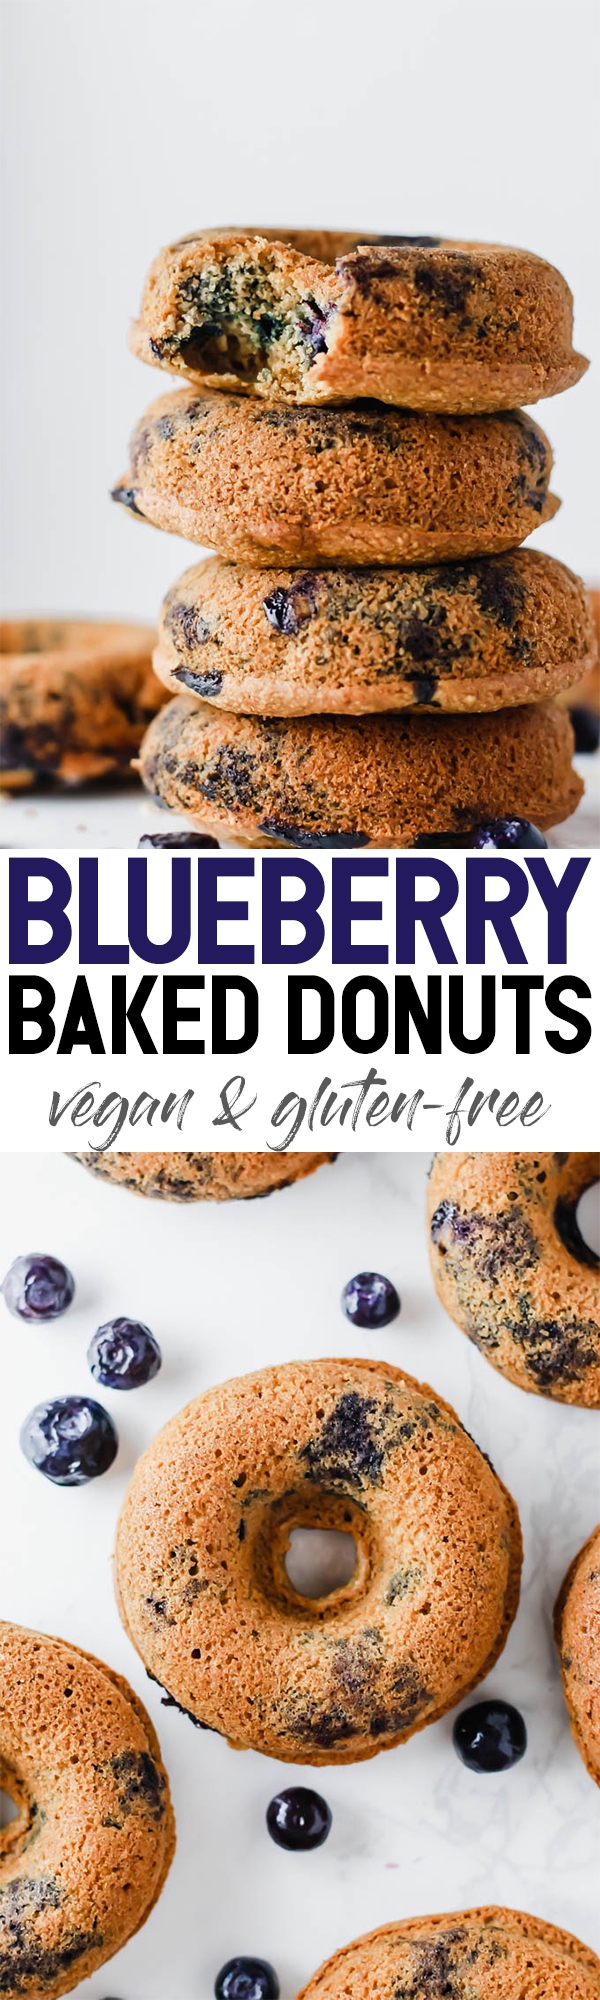 These sweet, fluffy Baked Vegan Blueberry Donuts make a satisfying breakfast, snack, or dessert! They're made with wholesome ingredients like oats, blueberries, and almond butter.